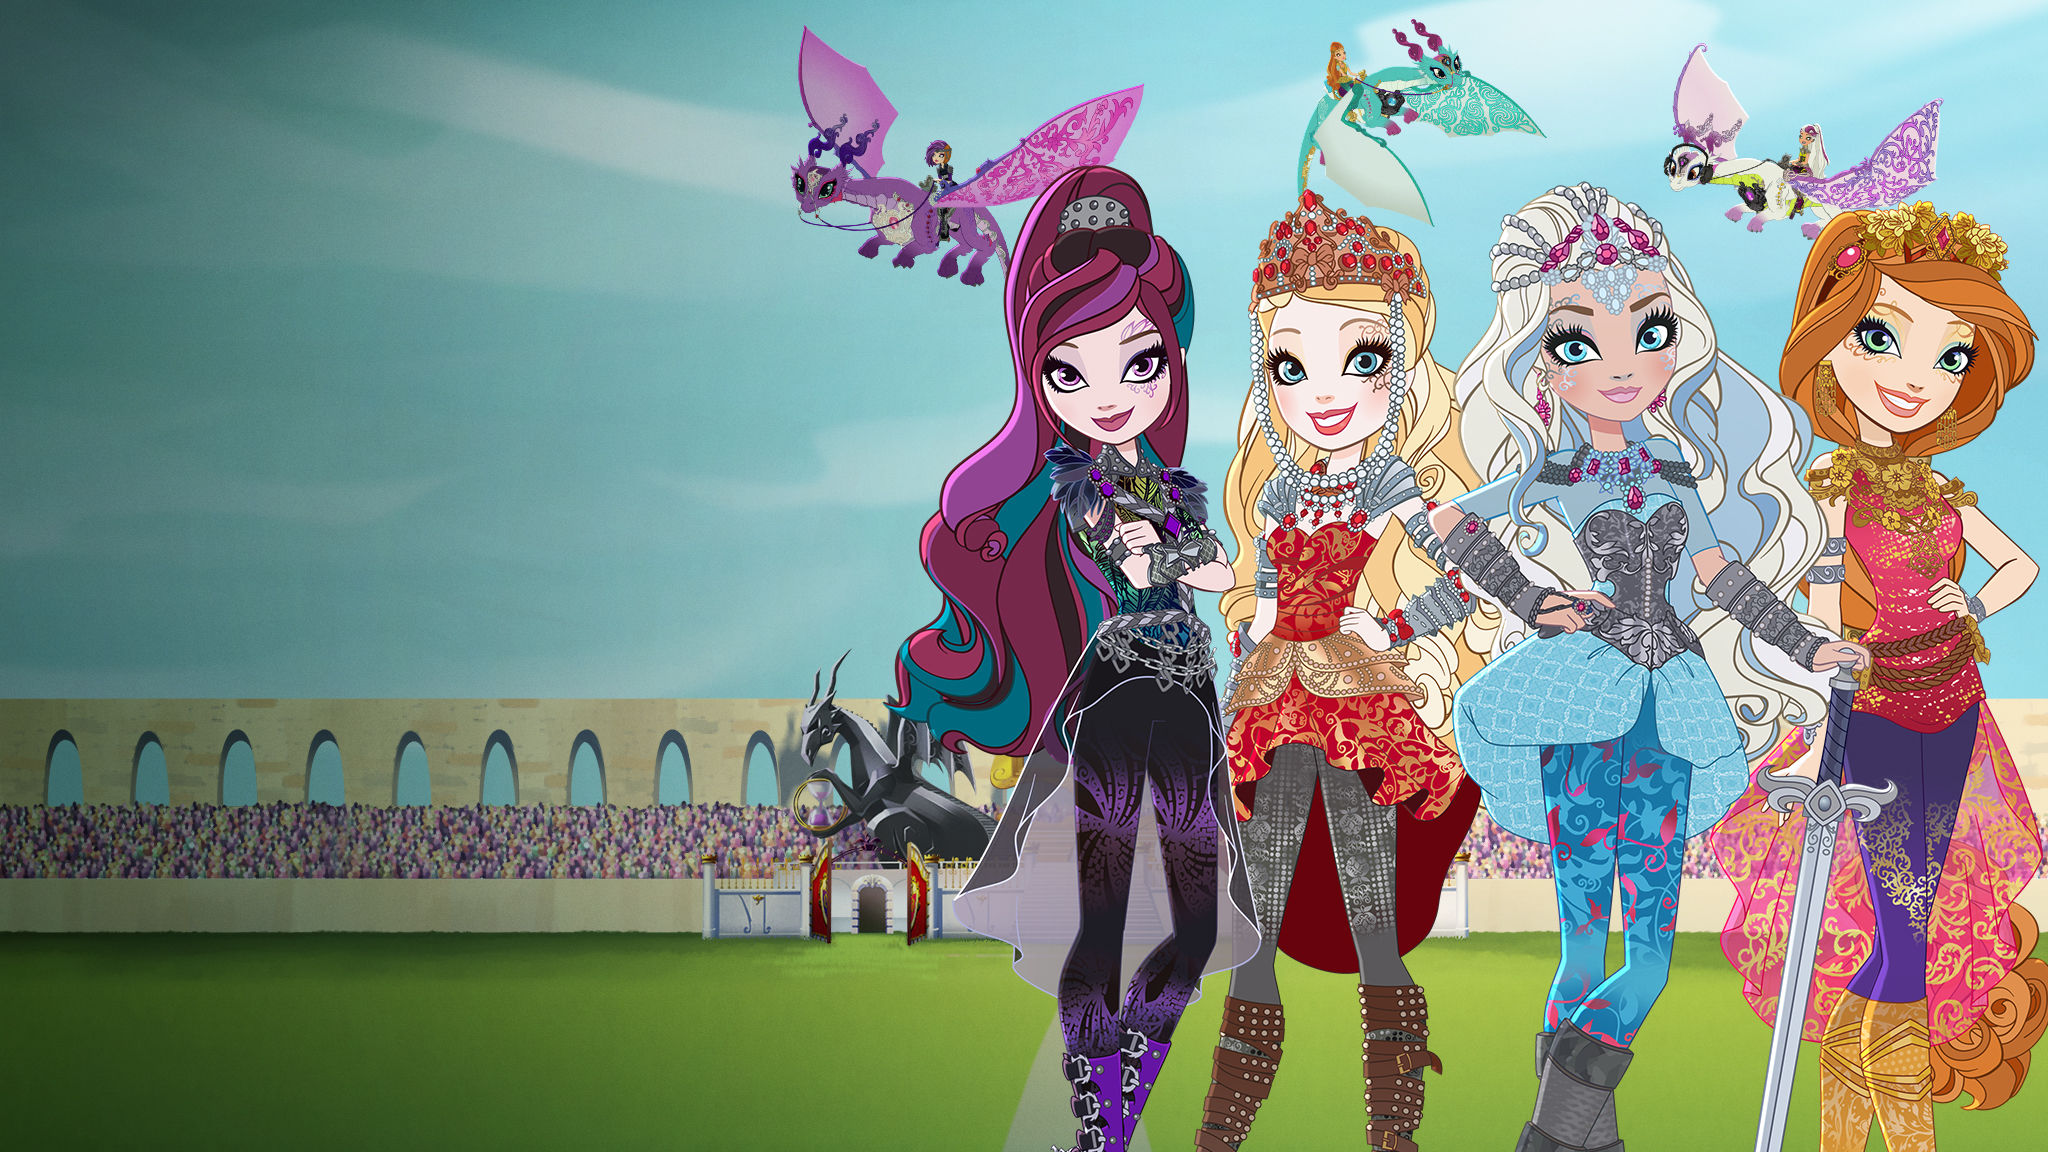 TV Show Ever After High HD Wallpaper | Background Image